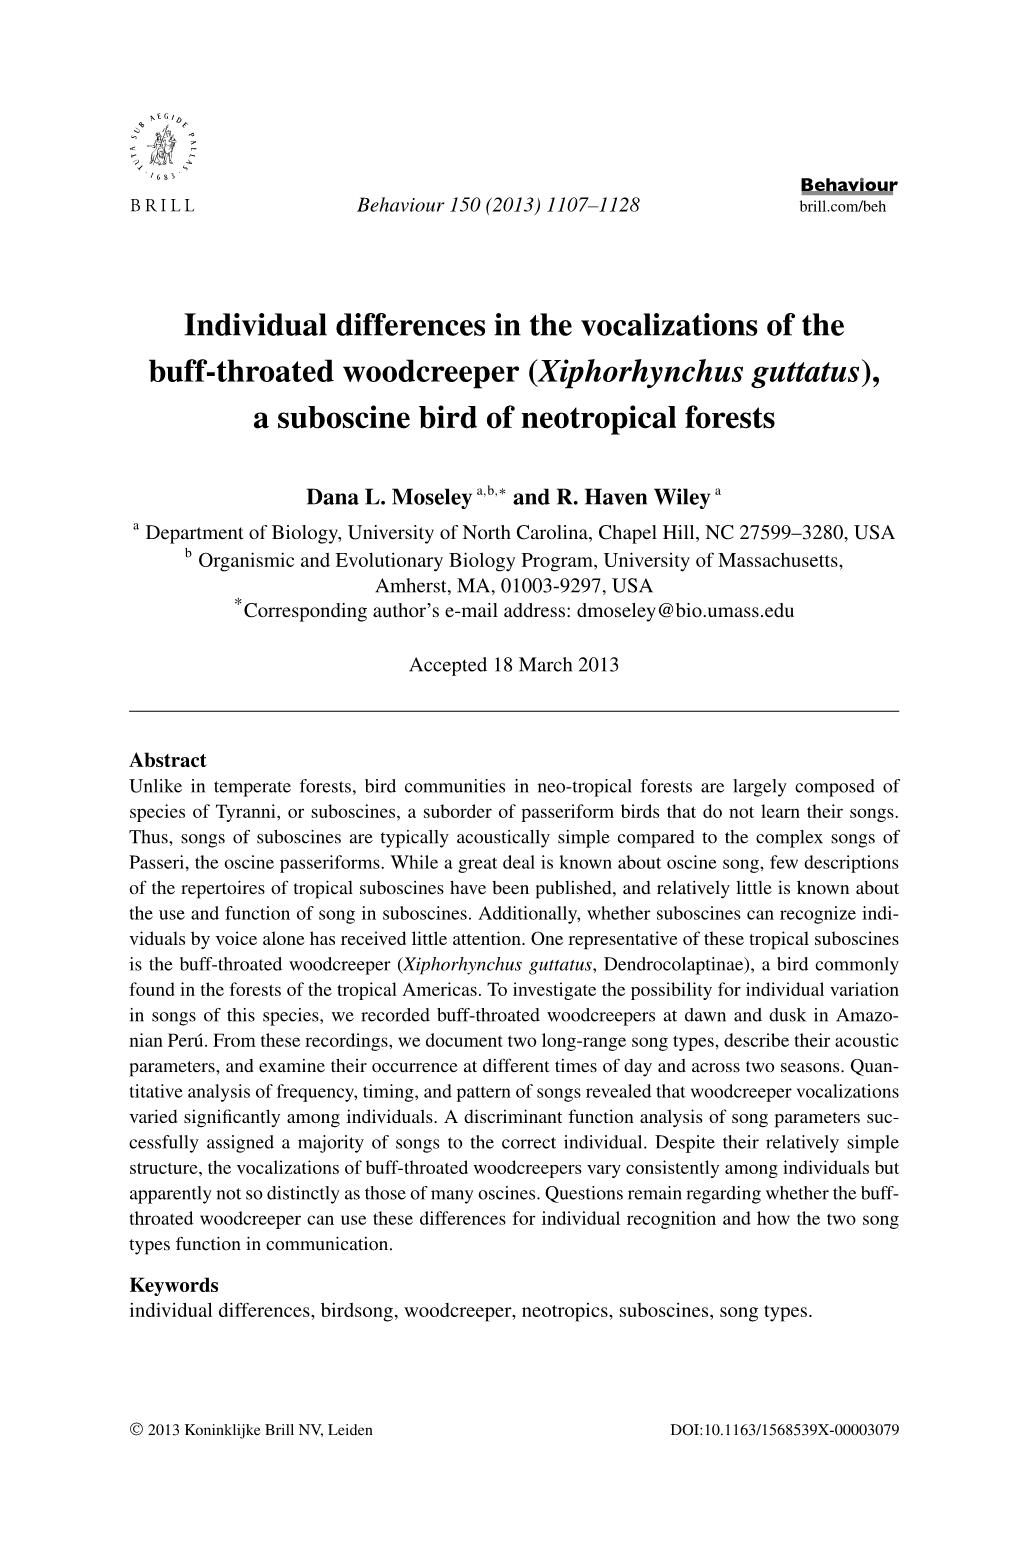 Individual Differences in the Vocalizations of the Buff-Throated Woodcreeper (Xiphorhynchus Guttatus), a Suboscine Bird of Neotropical Forests